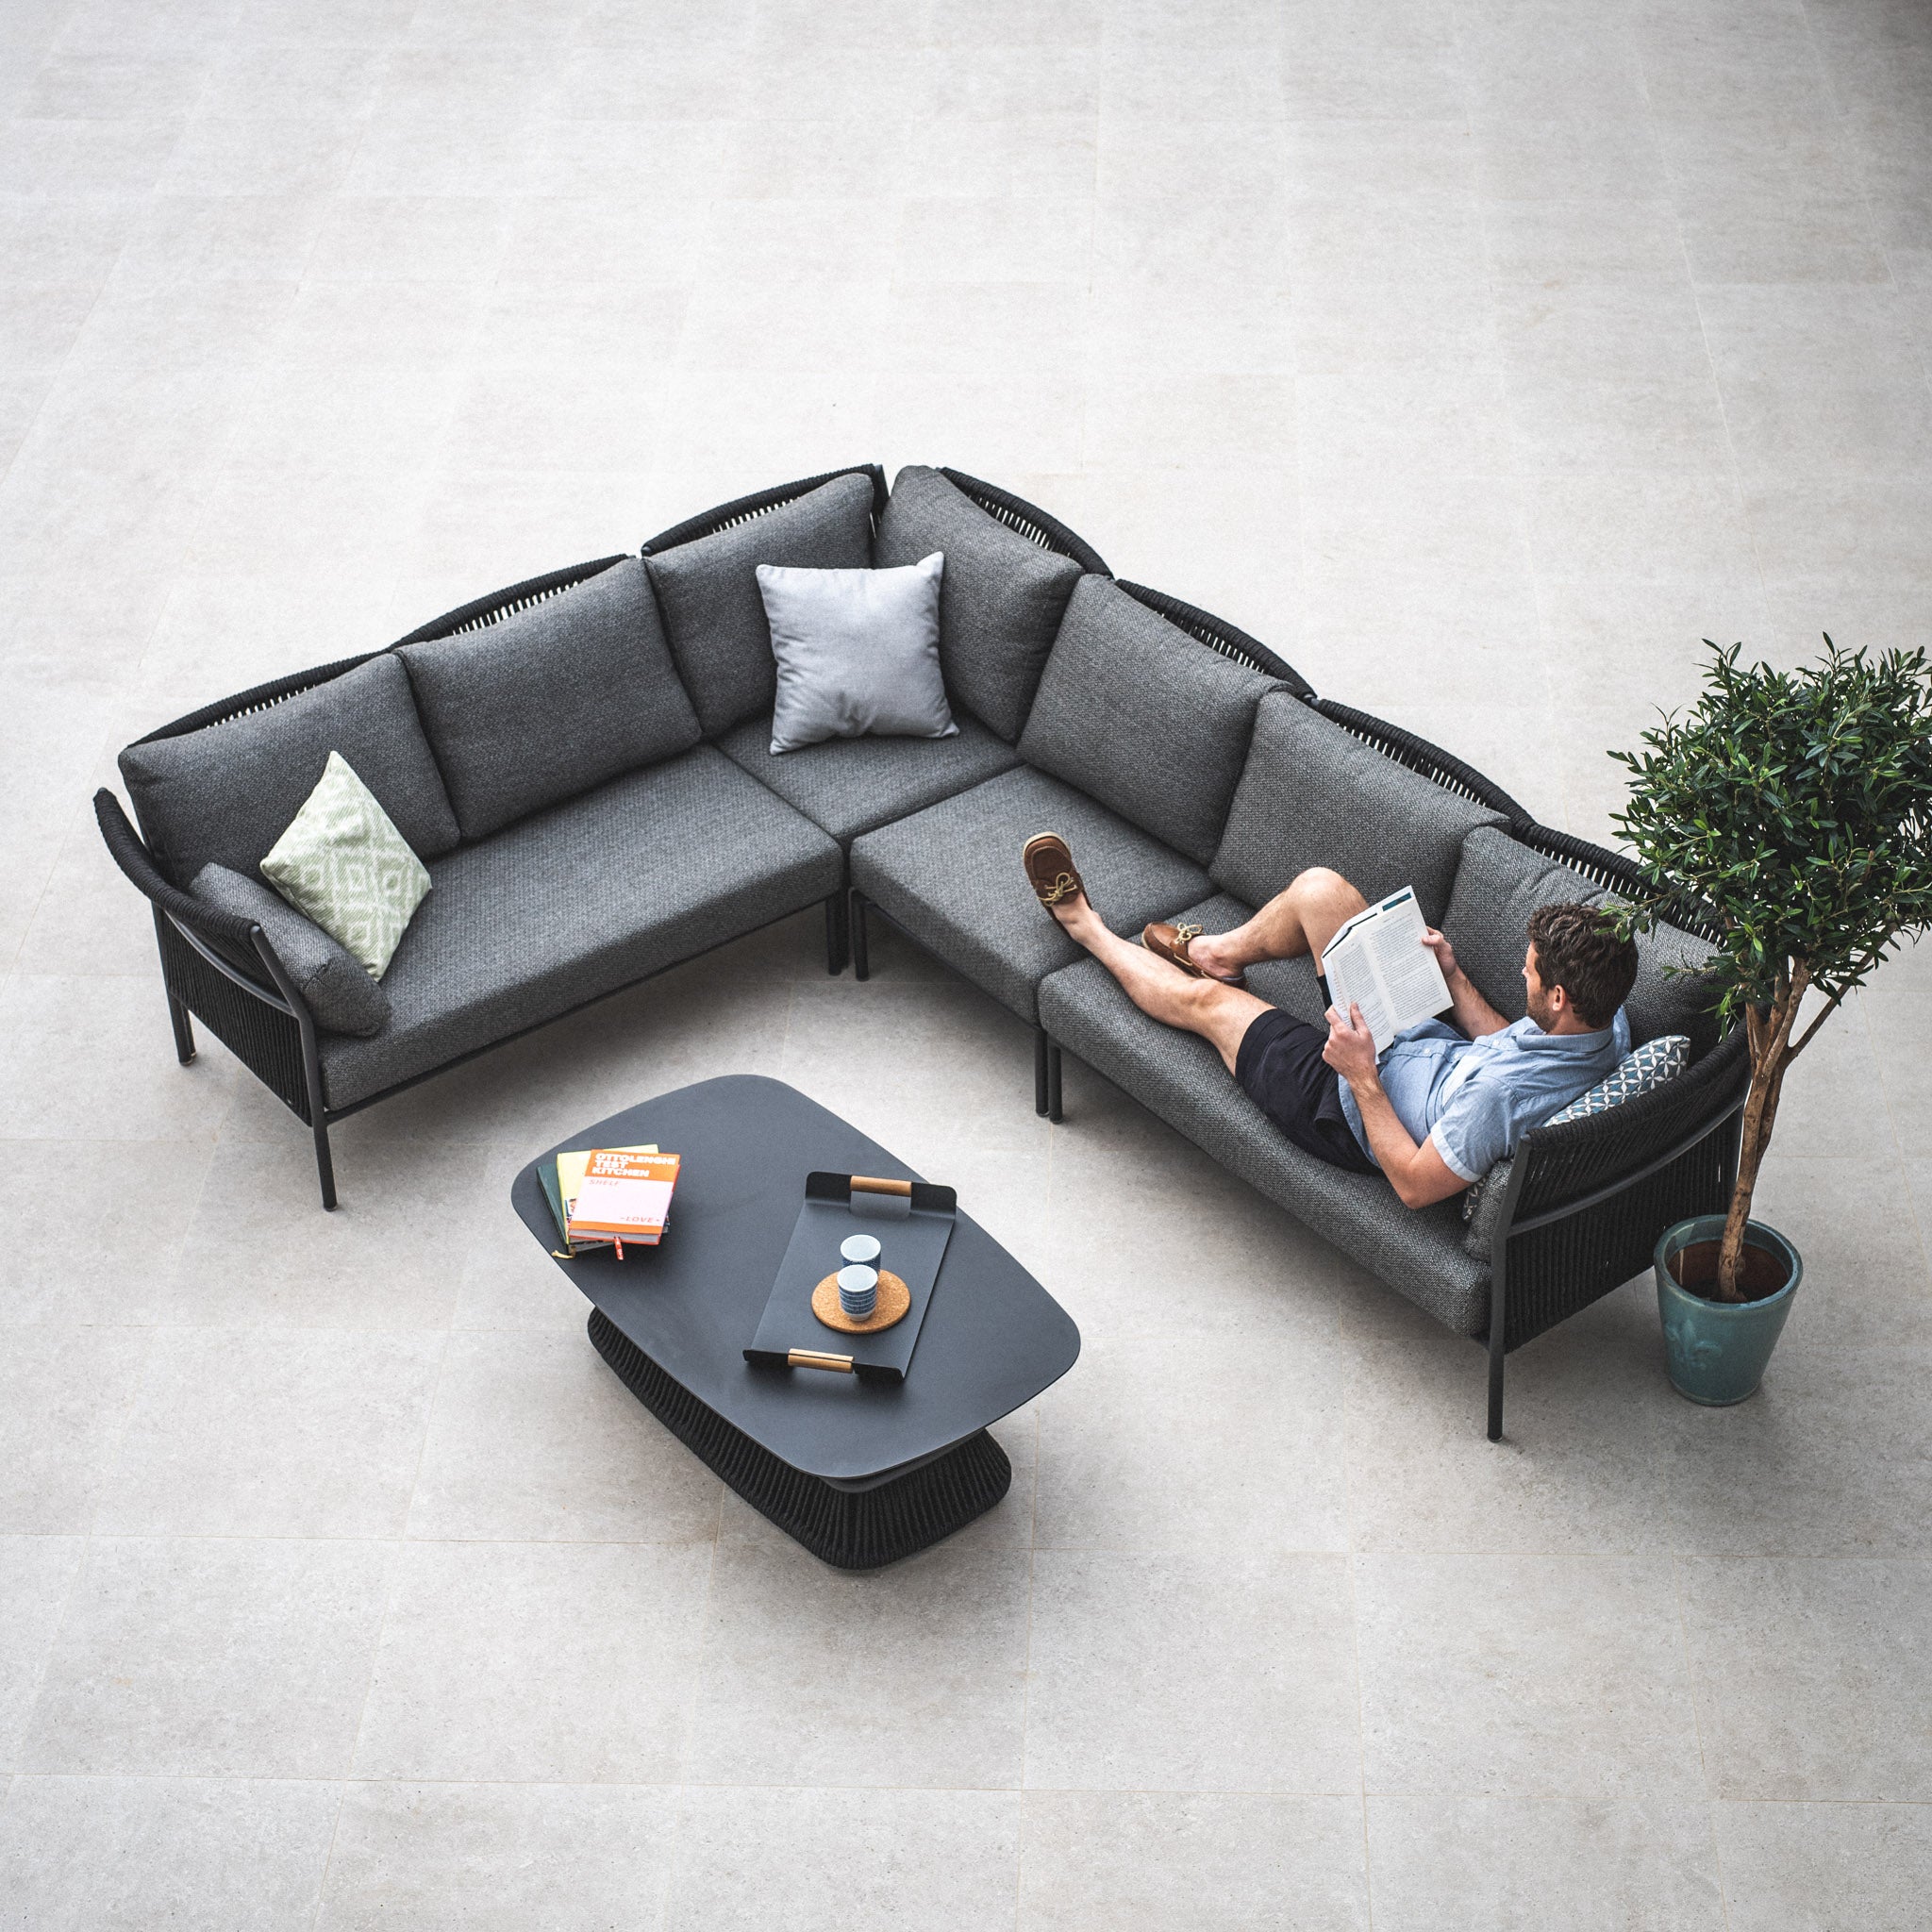 Salina Large Corner Group Set with Aluminium Table in Charcoal